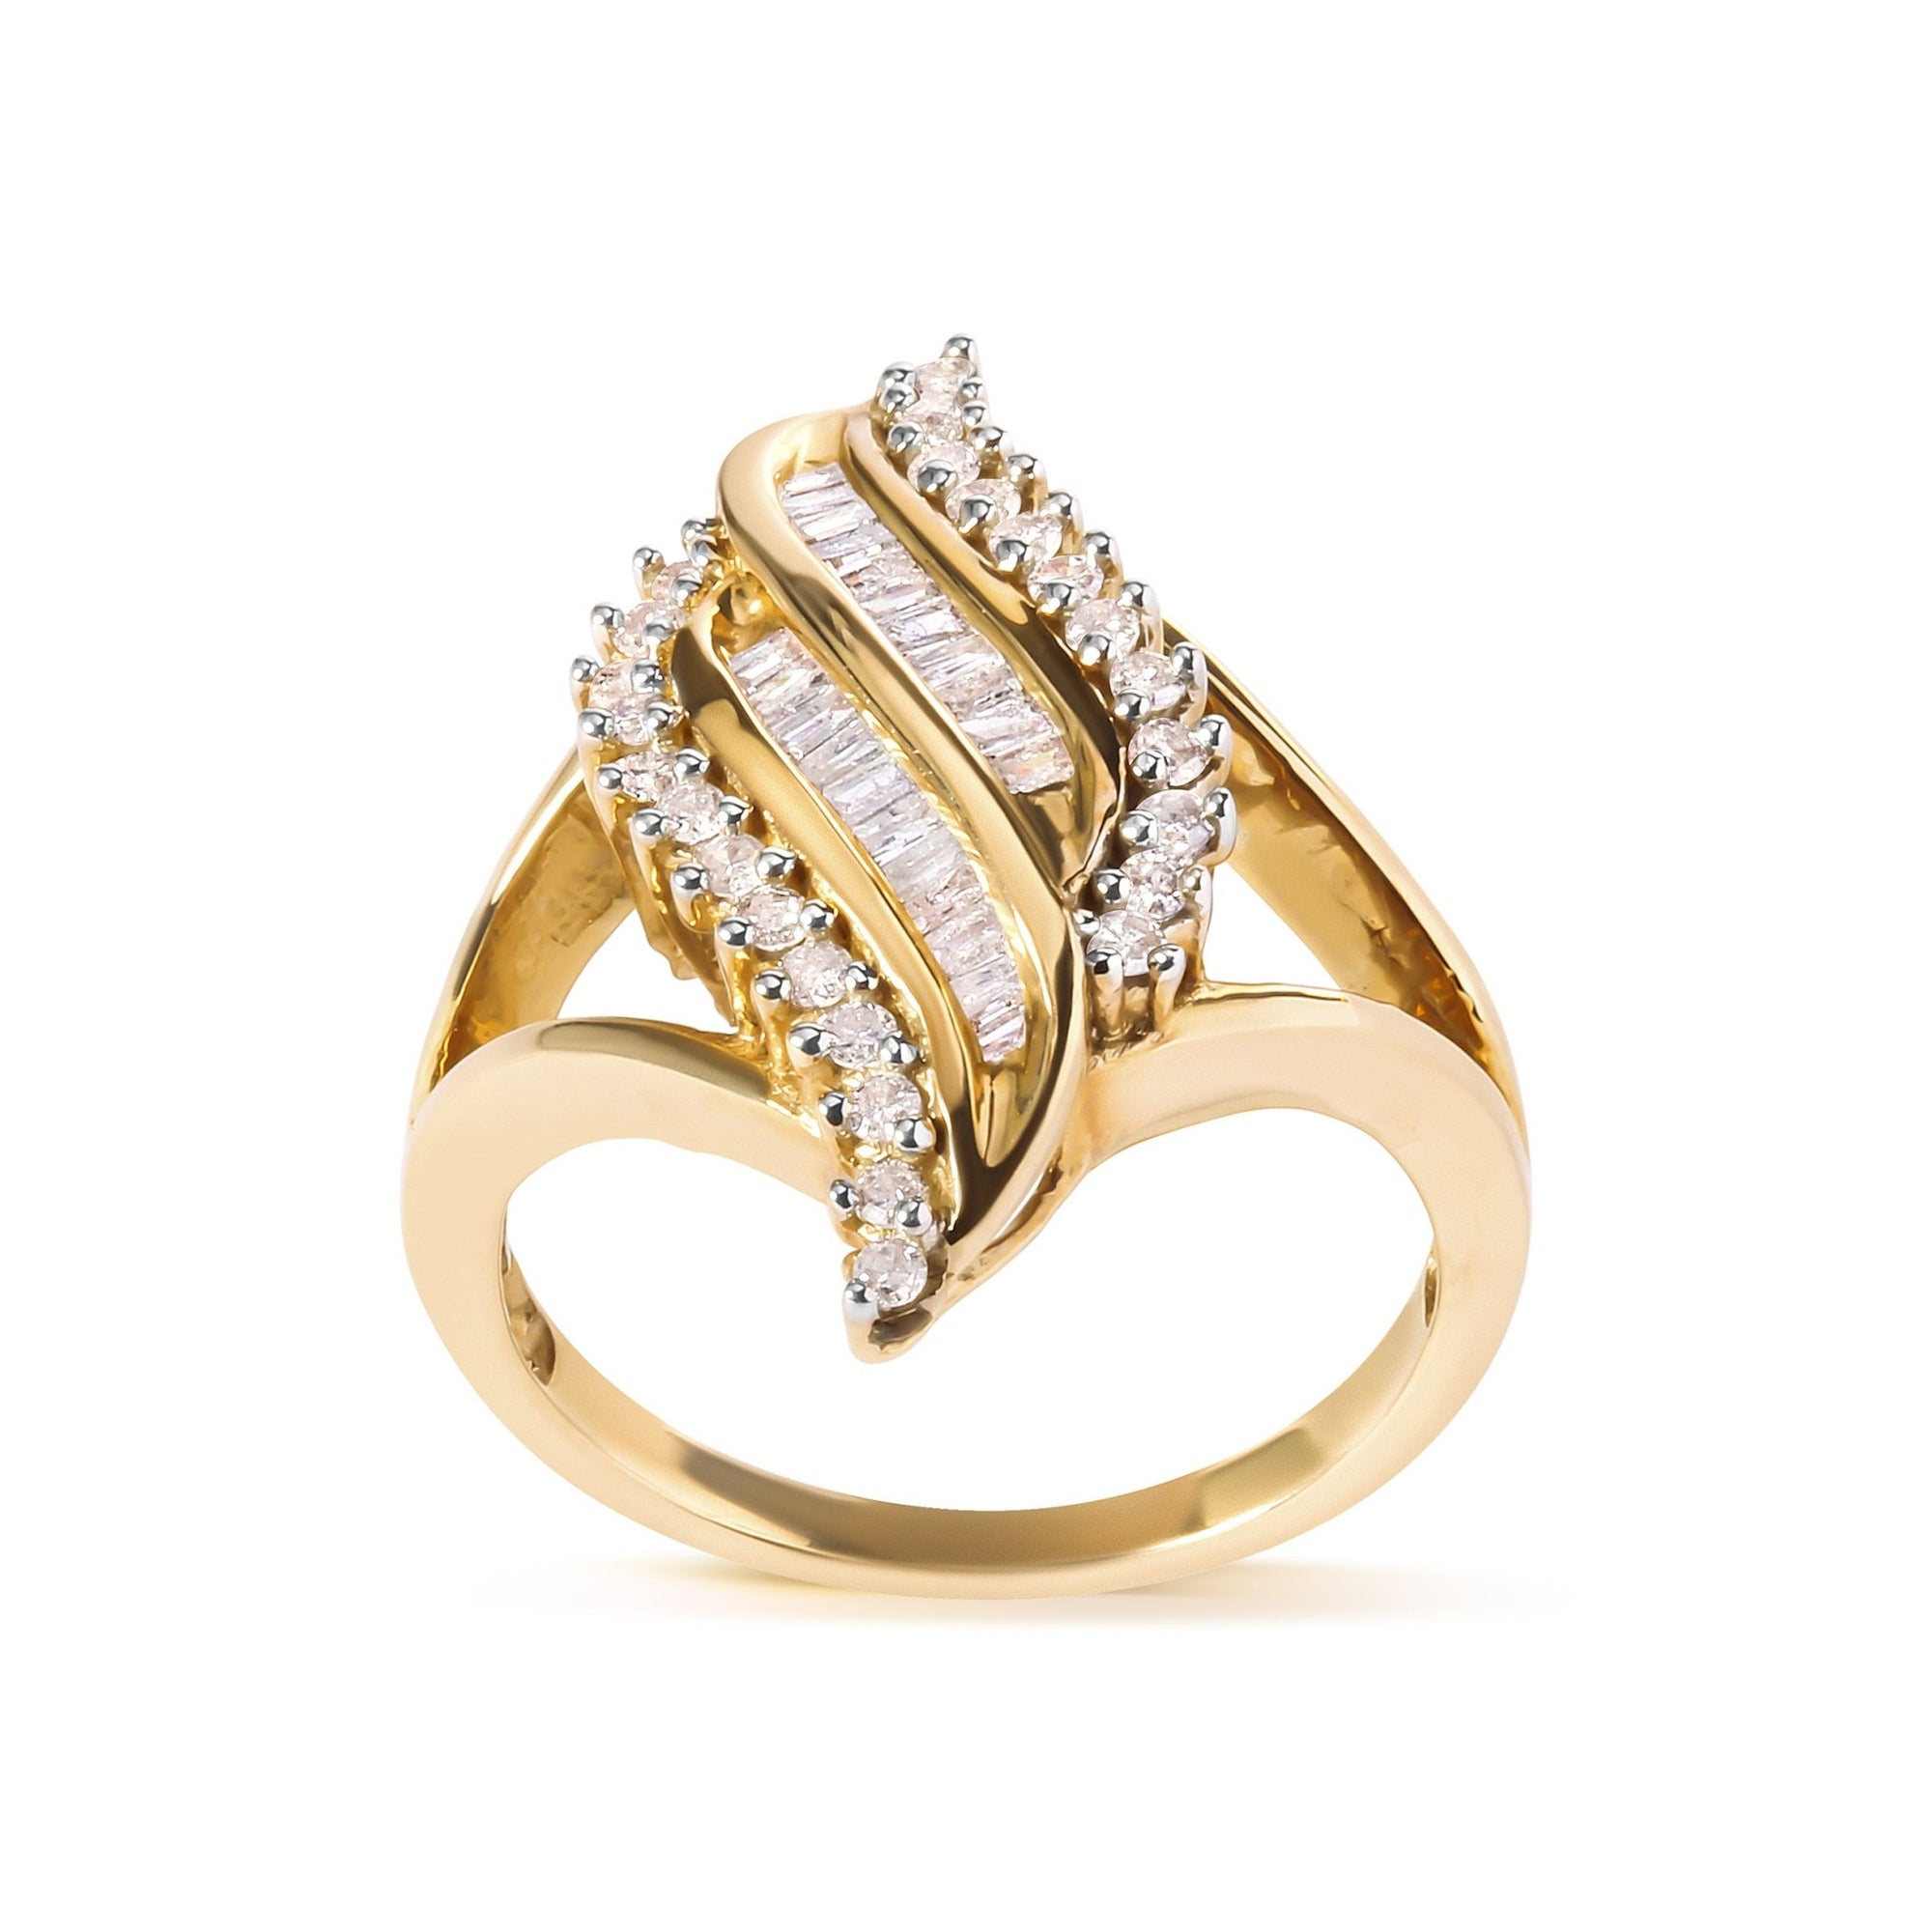 10K Yellow Gold 1/2 Cttw Round and Baguette Cut Diamond Cocktail Ring (H-I Color, I1-I2 Clarity) - LinkagejewelrydesignLinkagejewelrydesign